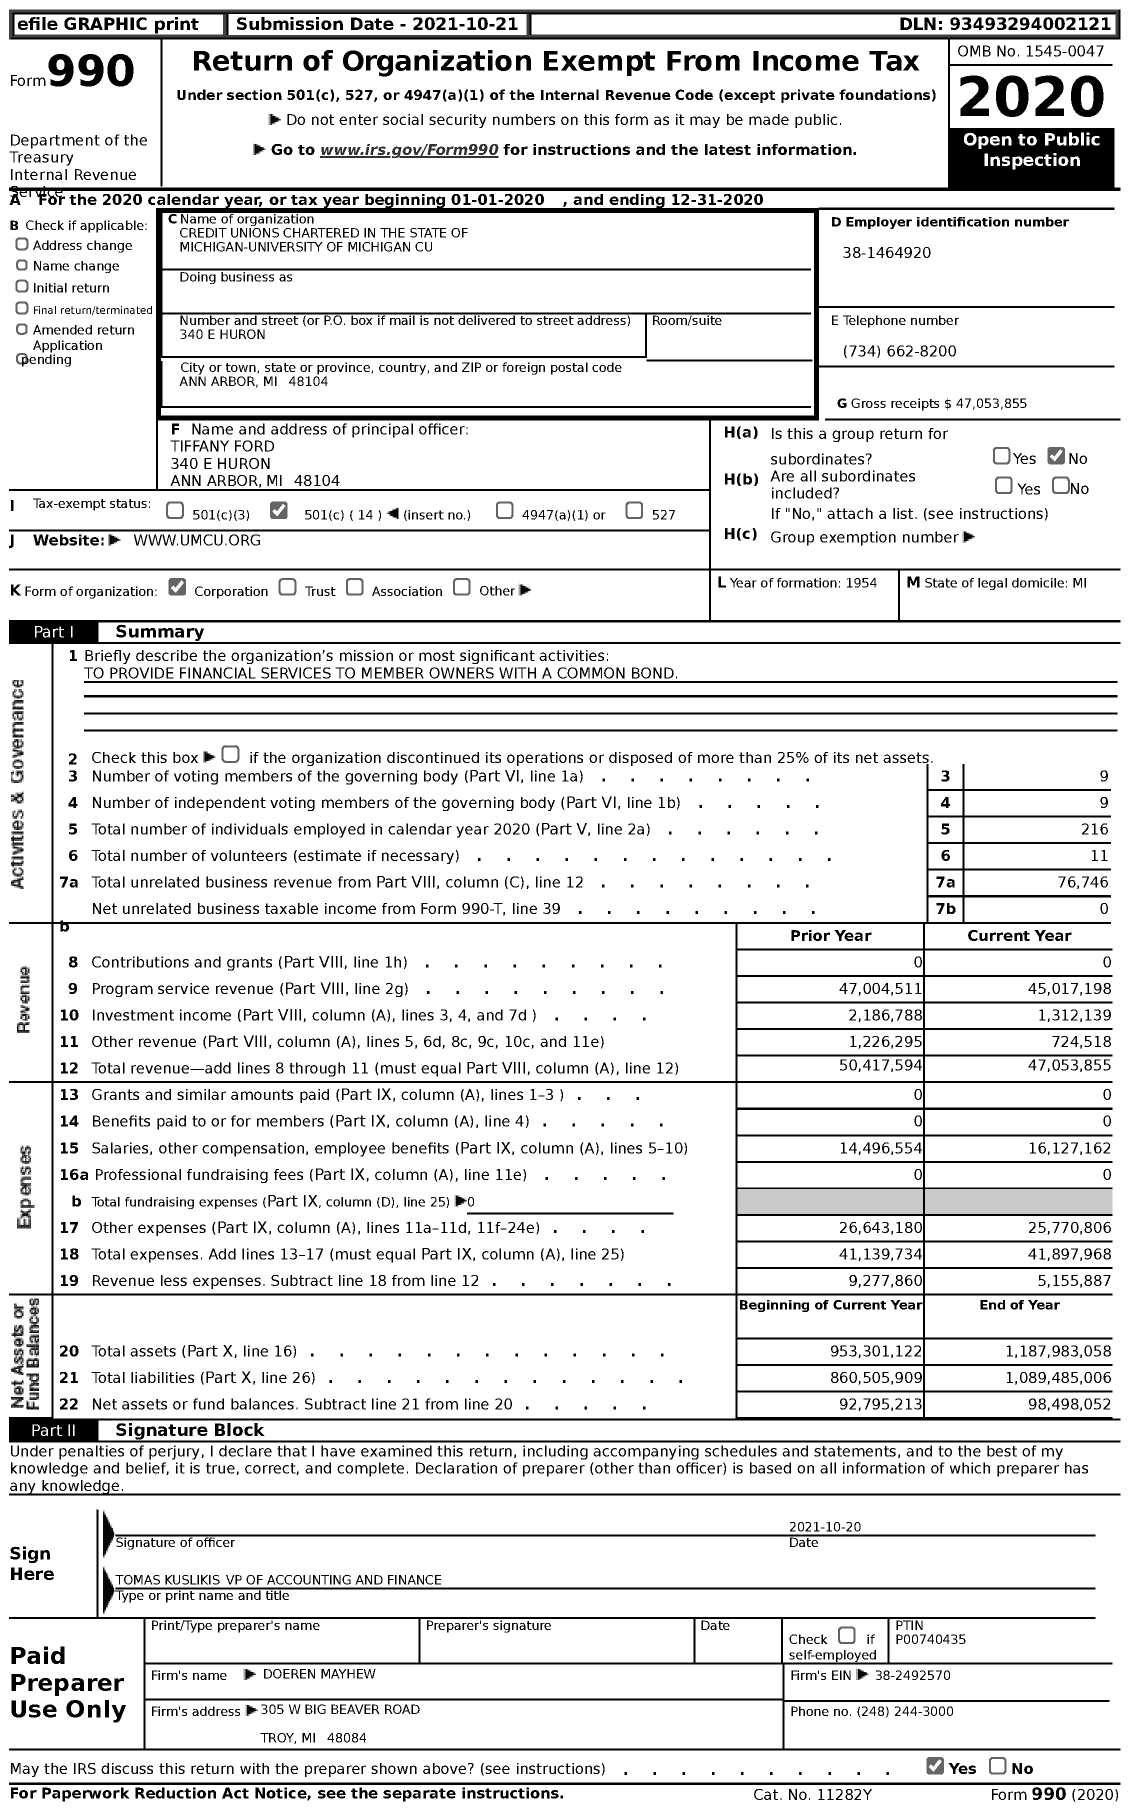 Image of first page of 2020 Form 990 for Credit Unions Chartered in the State of Michigan - 414 University of Michigan Cu (UMCU)